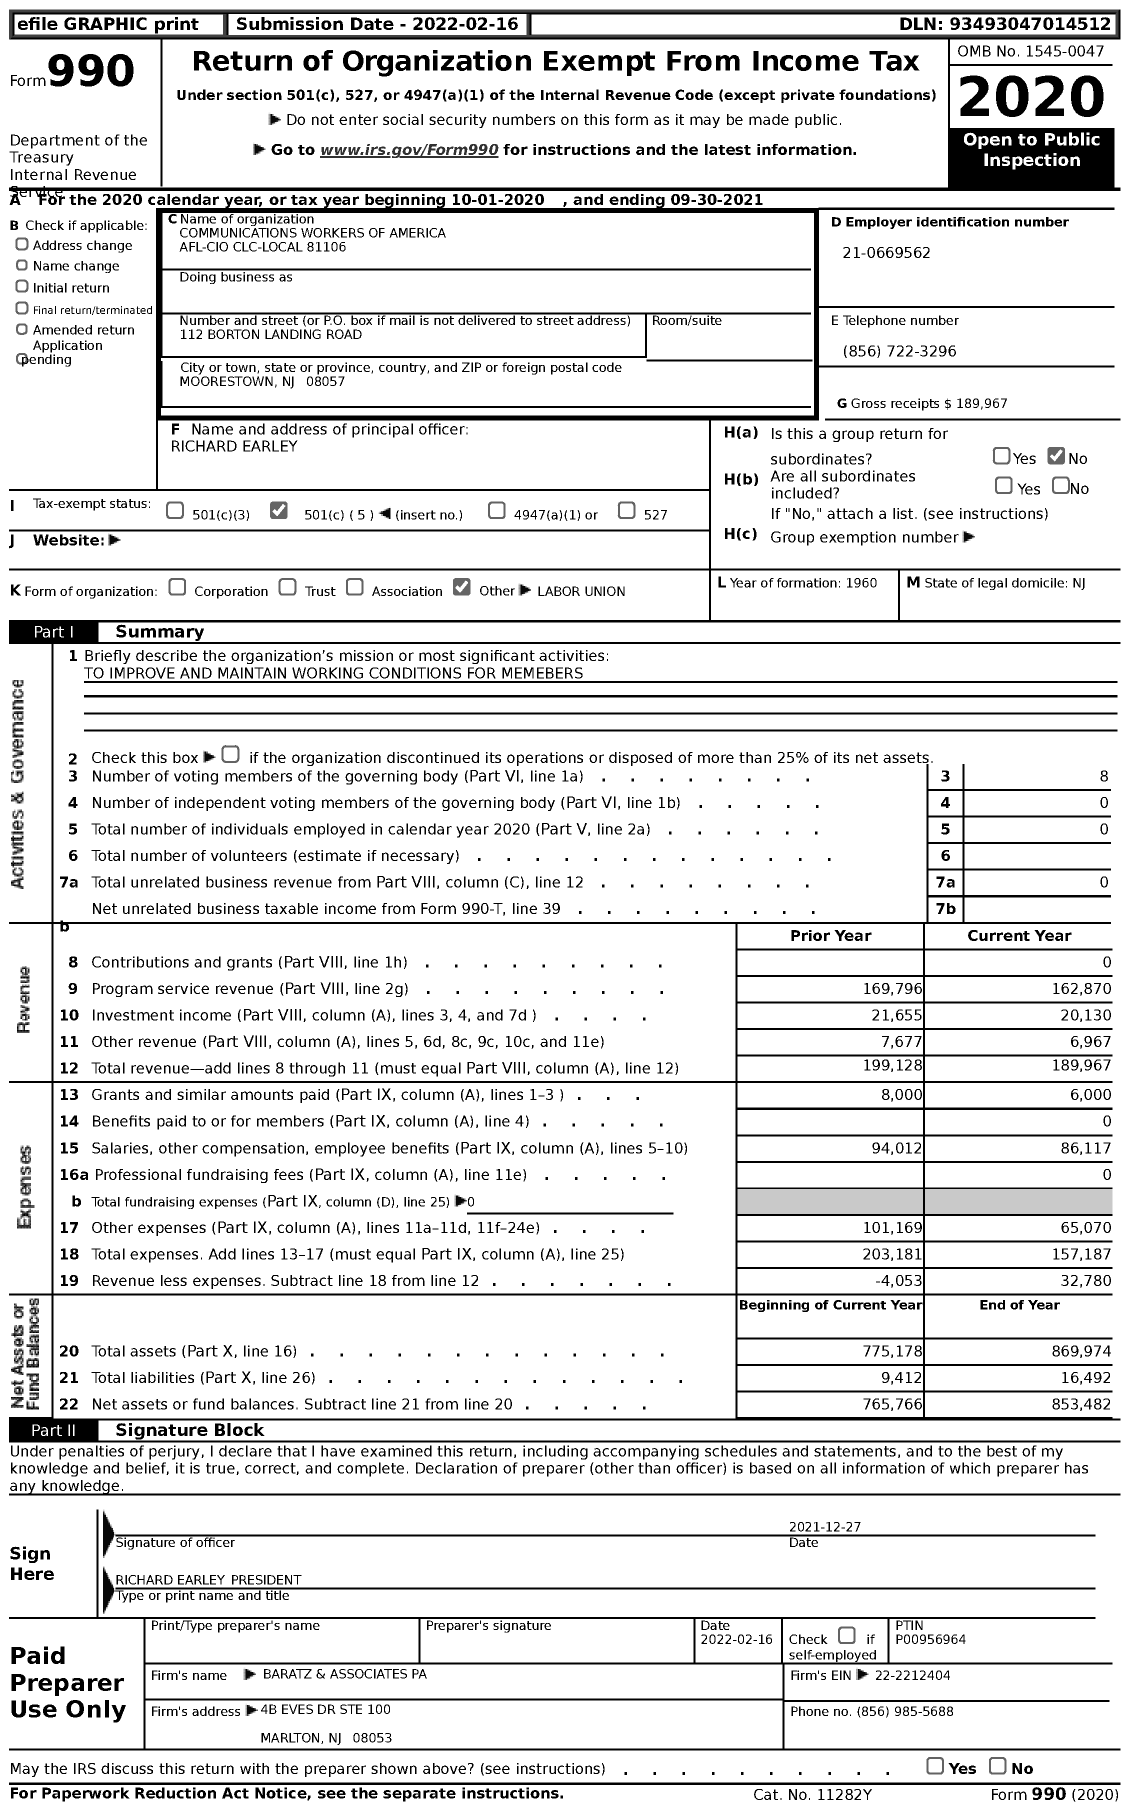 Image of first page of 2020 Form 990 for Communications Workers of America AFL-CIO Clc-Local 81106